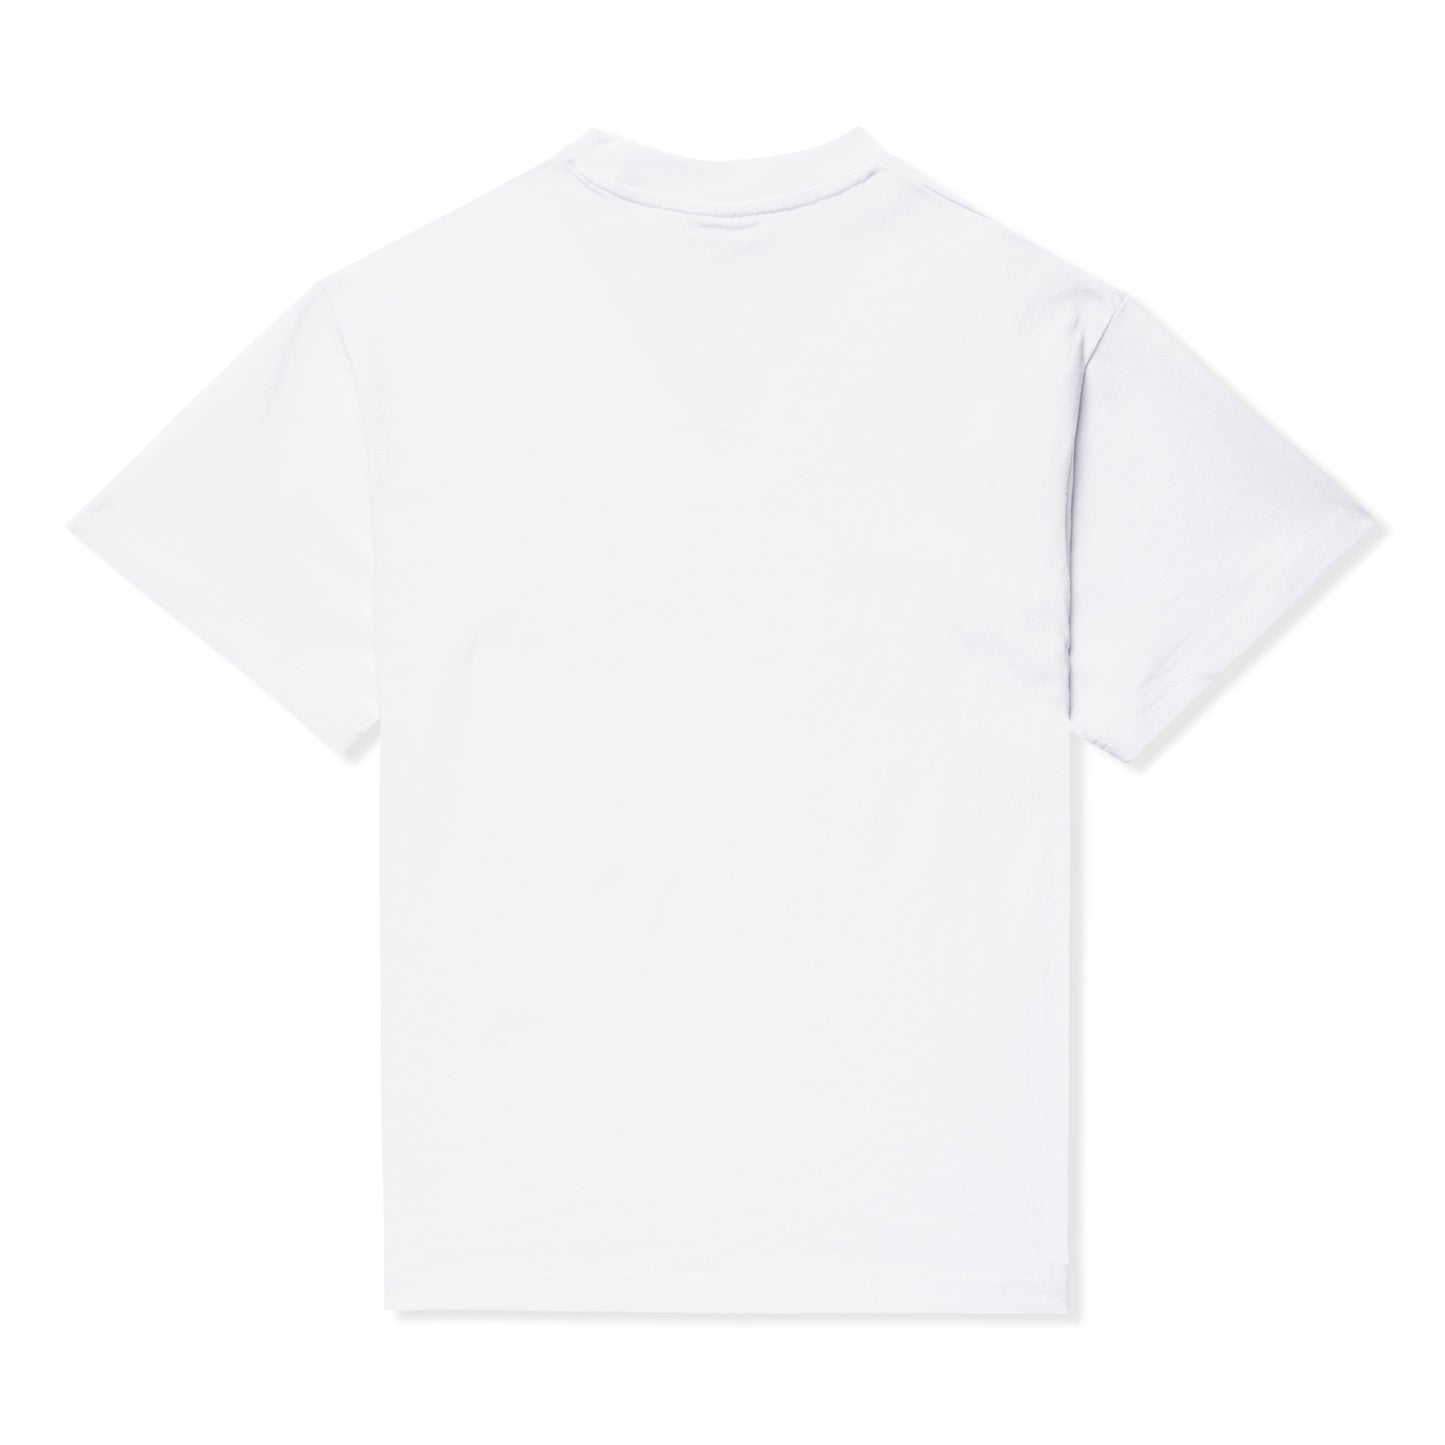 CASH ONLY Wrecking Tee (White)